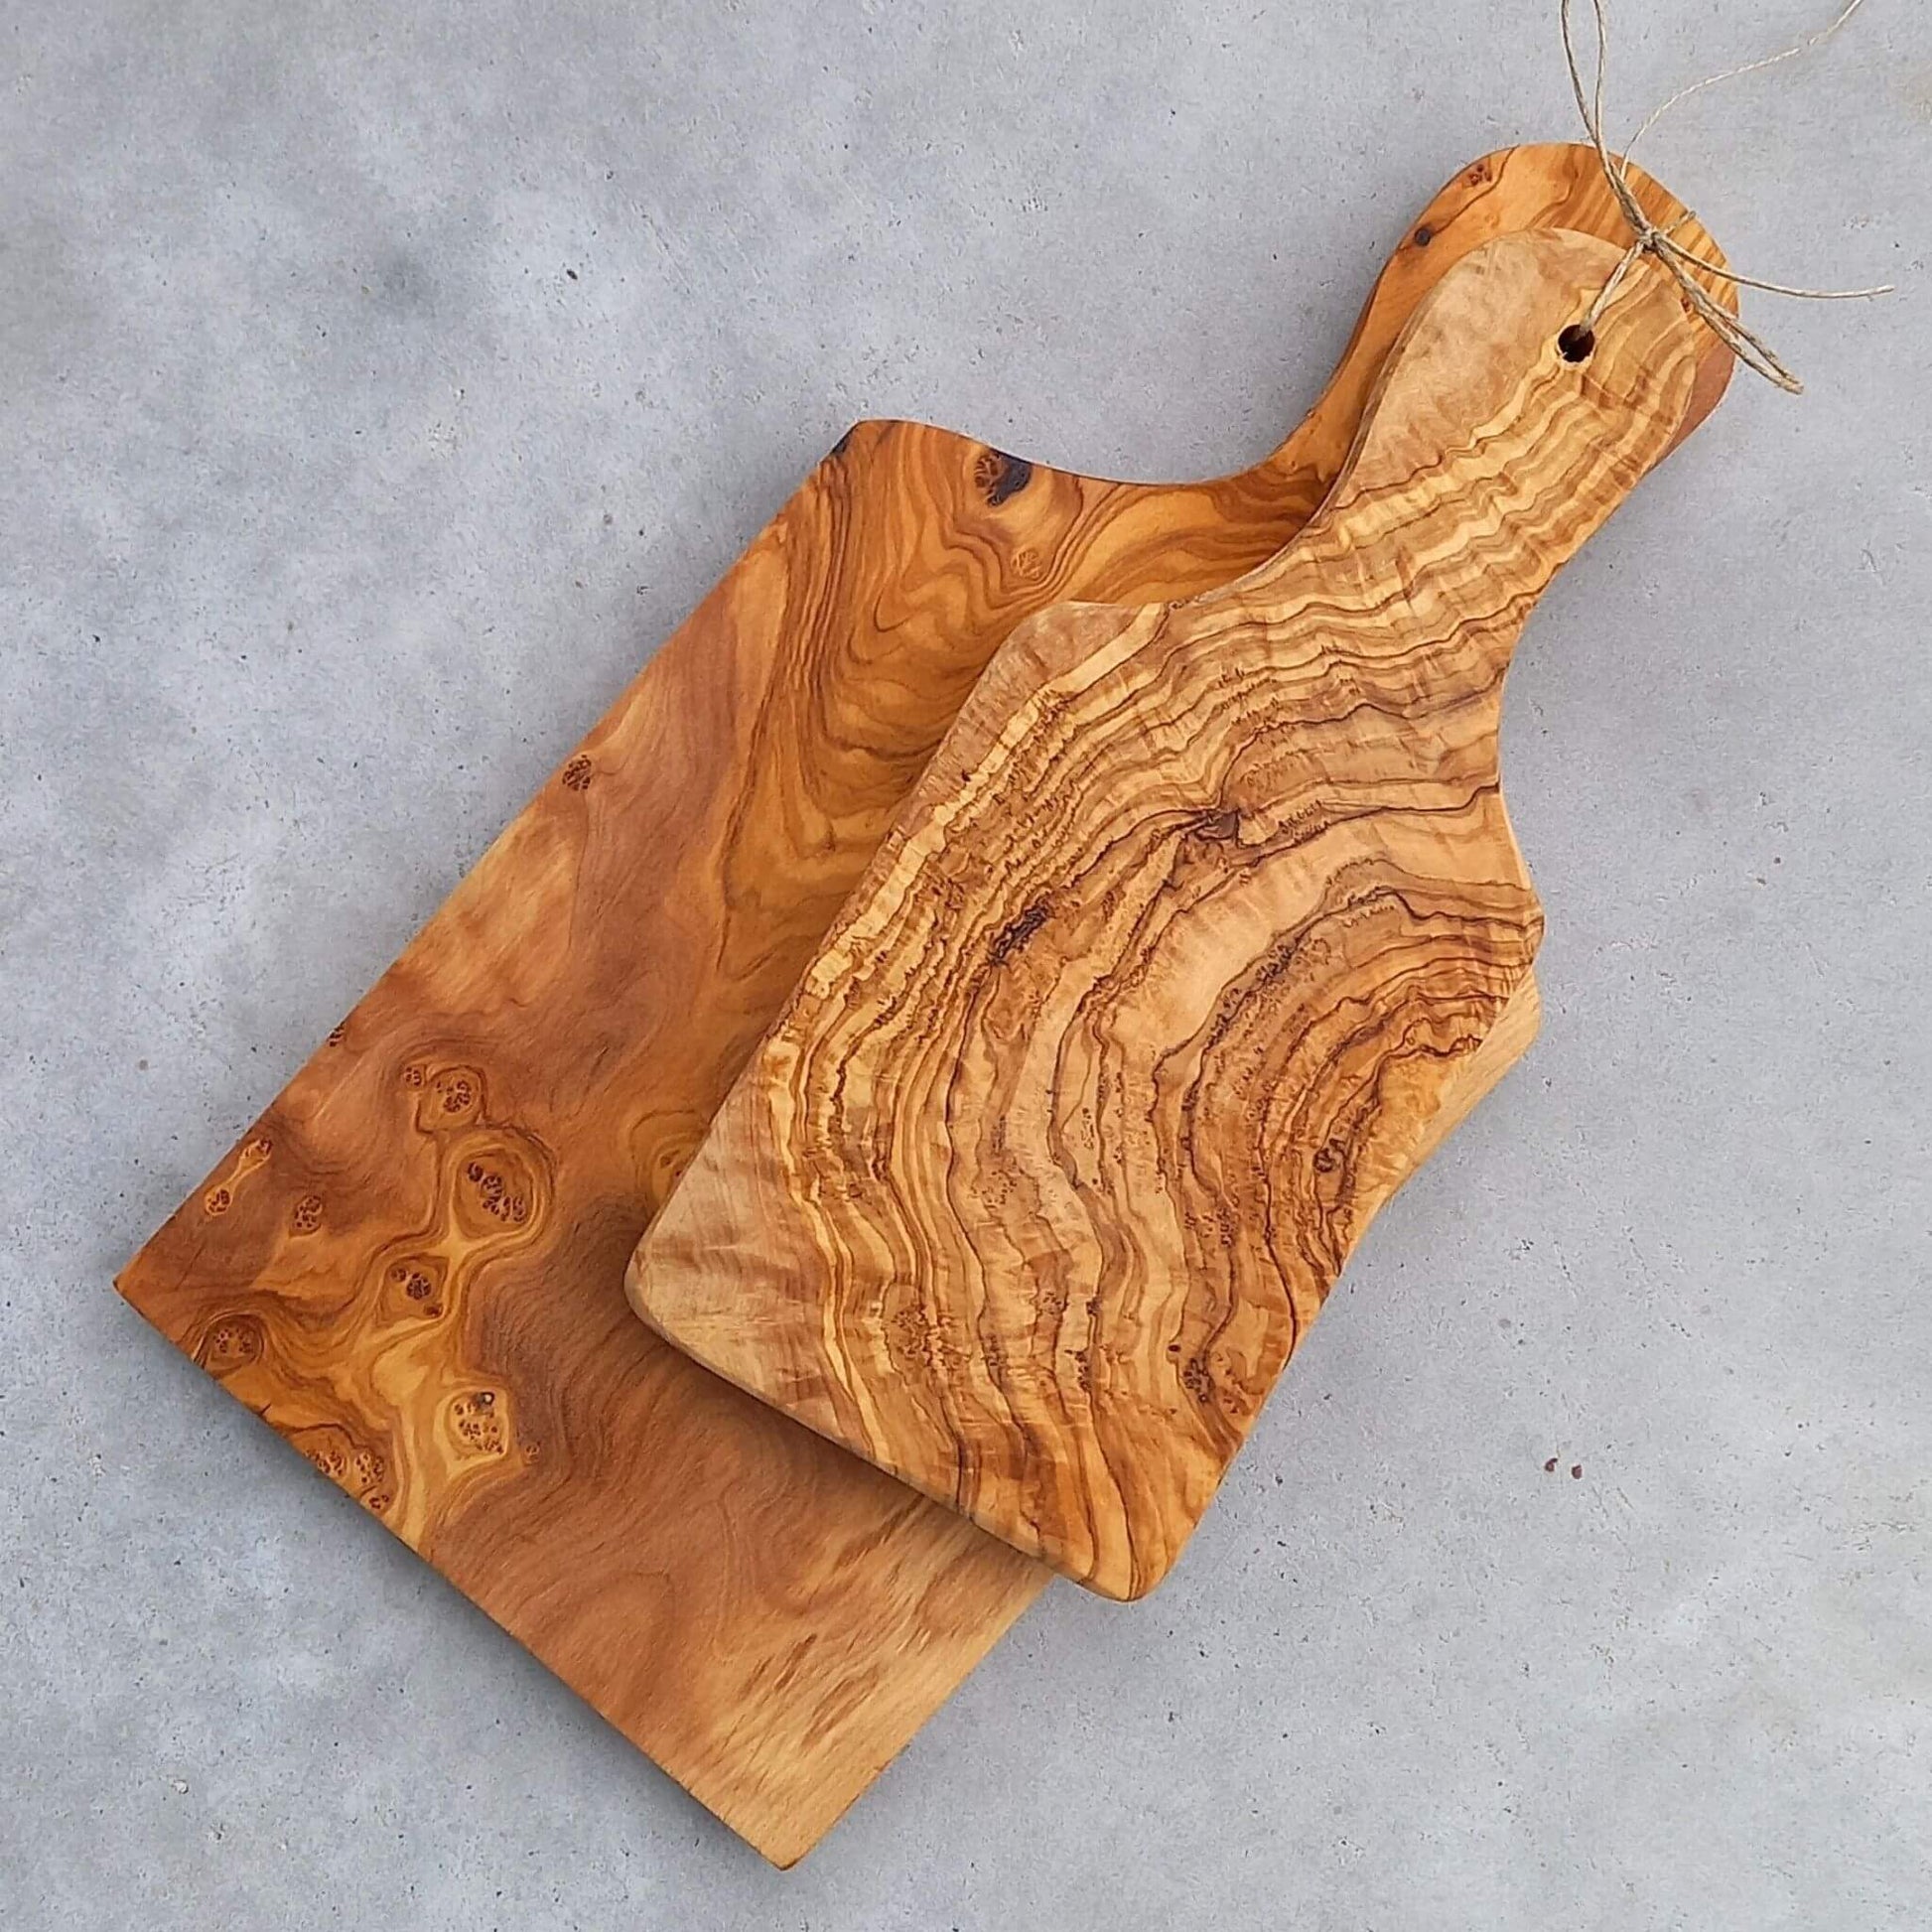 Olive wood - Set of 2 Olive Wood cutting boards with handle